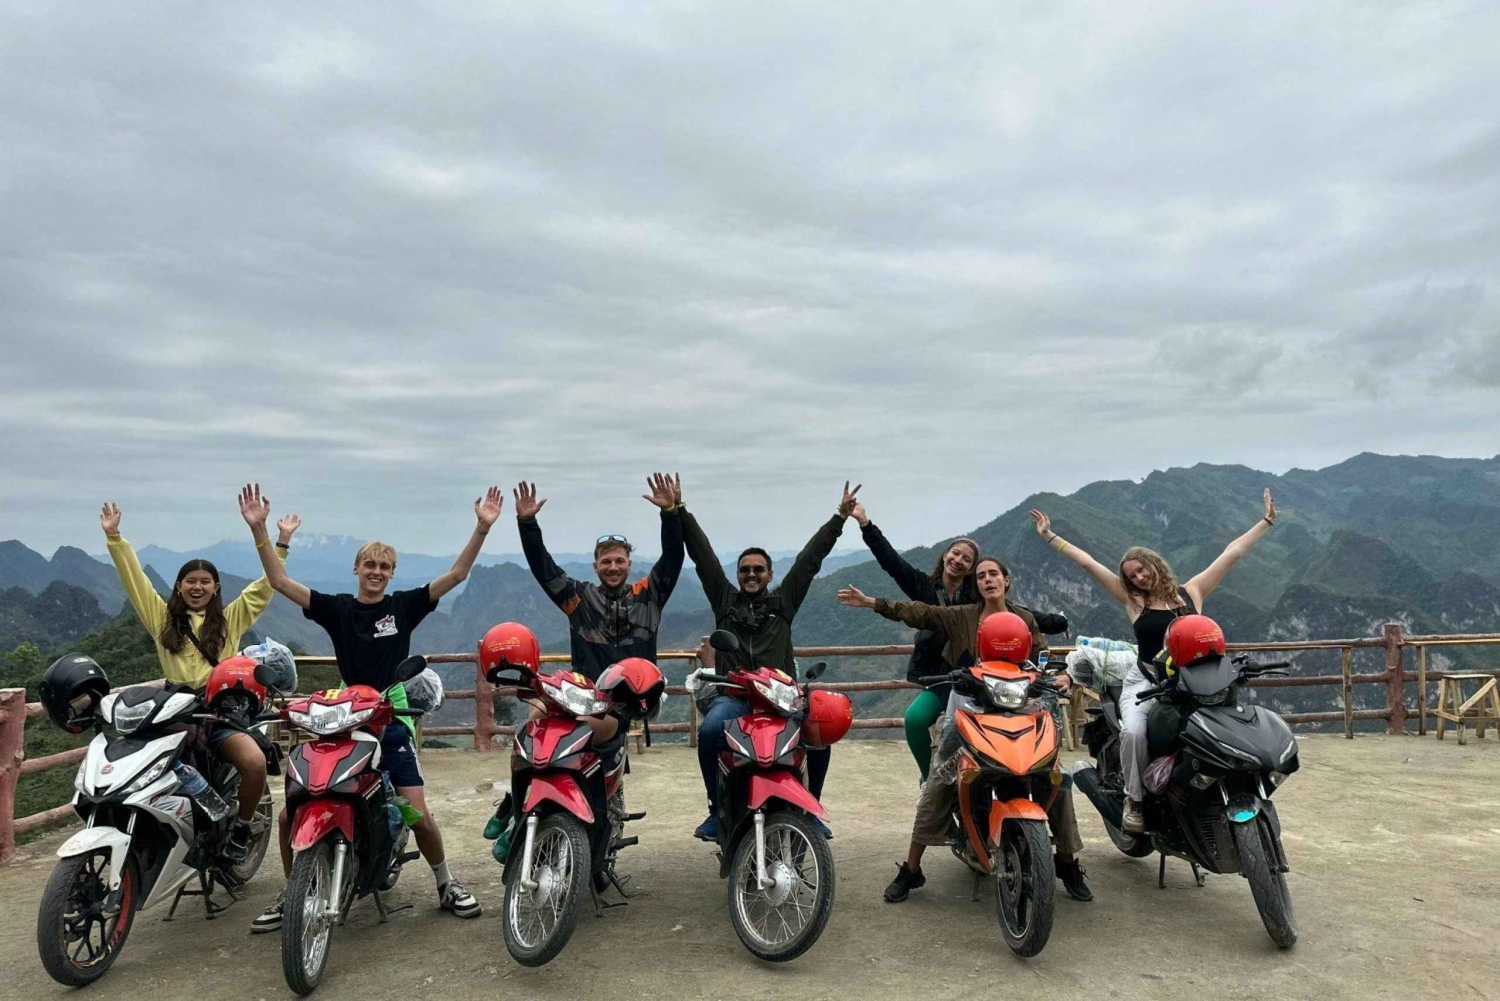 From Hanoi: Ha Giang Loop 4-Night 4-Day Tour with Easy Rider